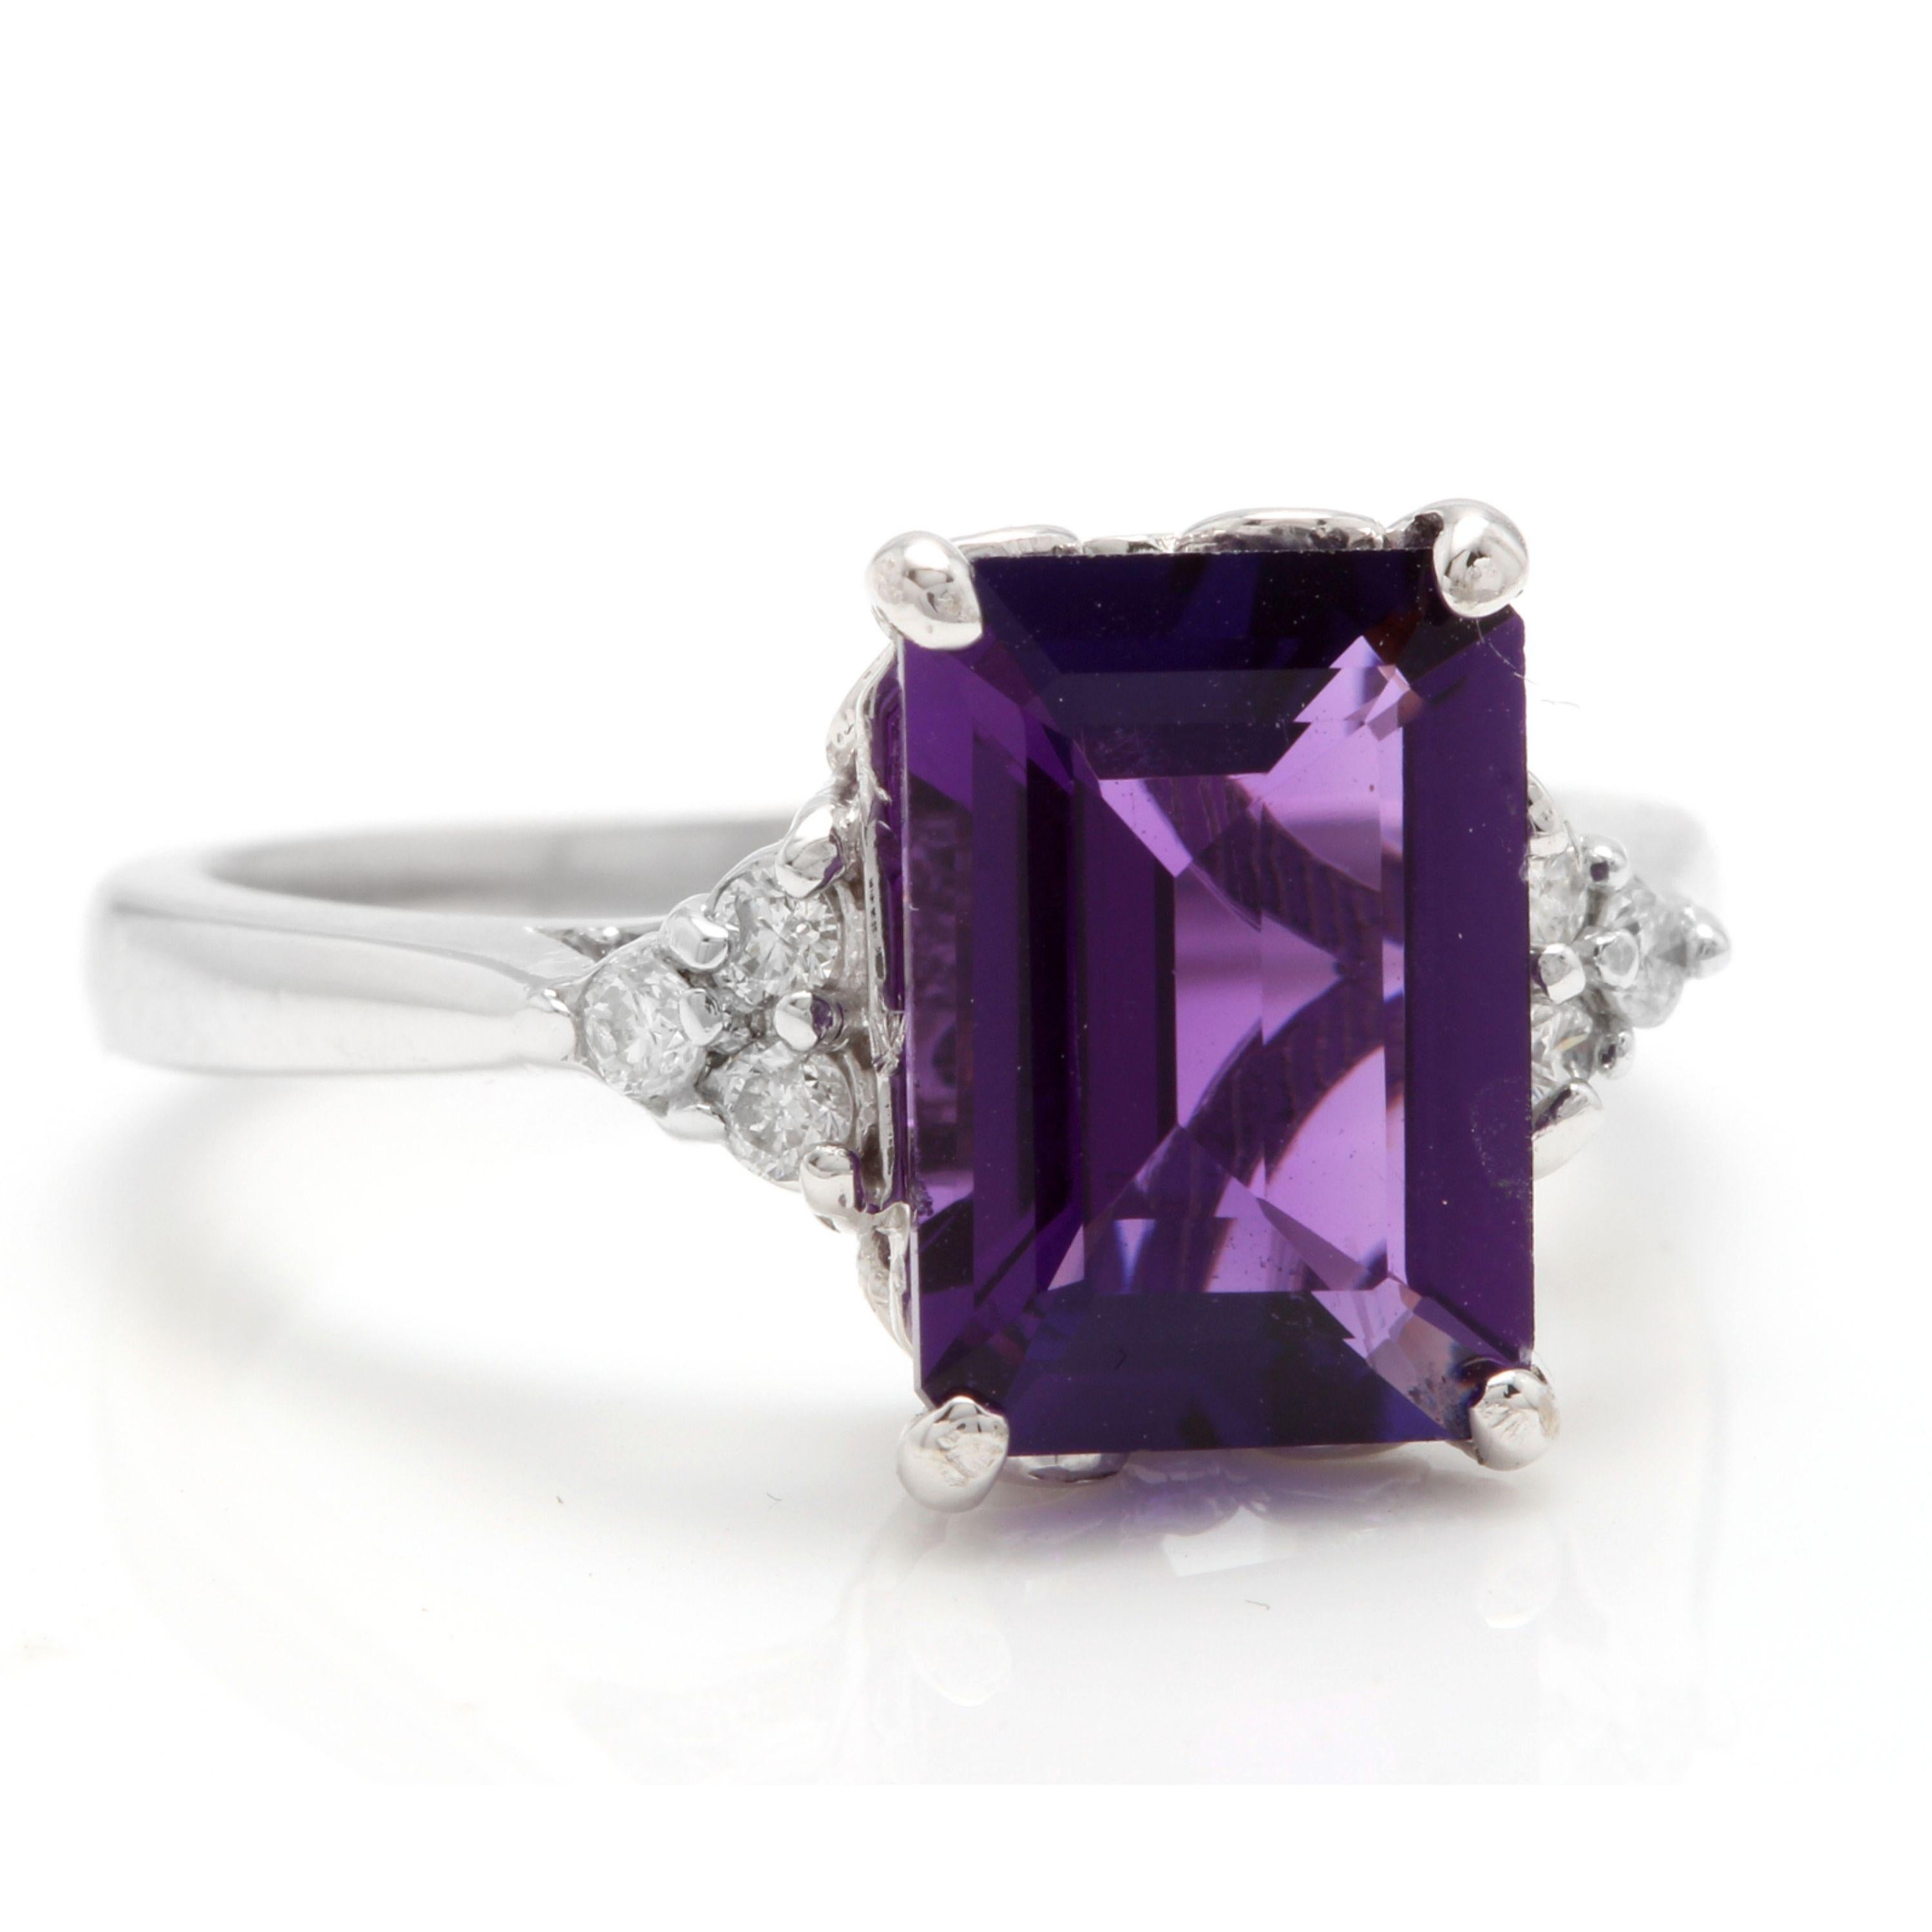 4.15 Carats Natural Amethyst and Diamond 14K Solid White Gold Ring

Total Natural Emerald Cut Amethyst Weights: Approx. 4.00 Carats

Amethyst Measures: Approx. 10.00 x 8.00mm

Natural Round Diamonds Weight: Approx. 0.15 Carats (color G-H /Clarity